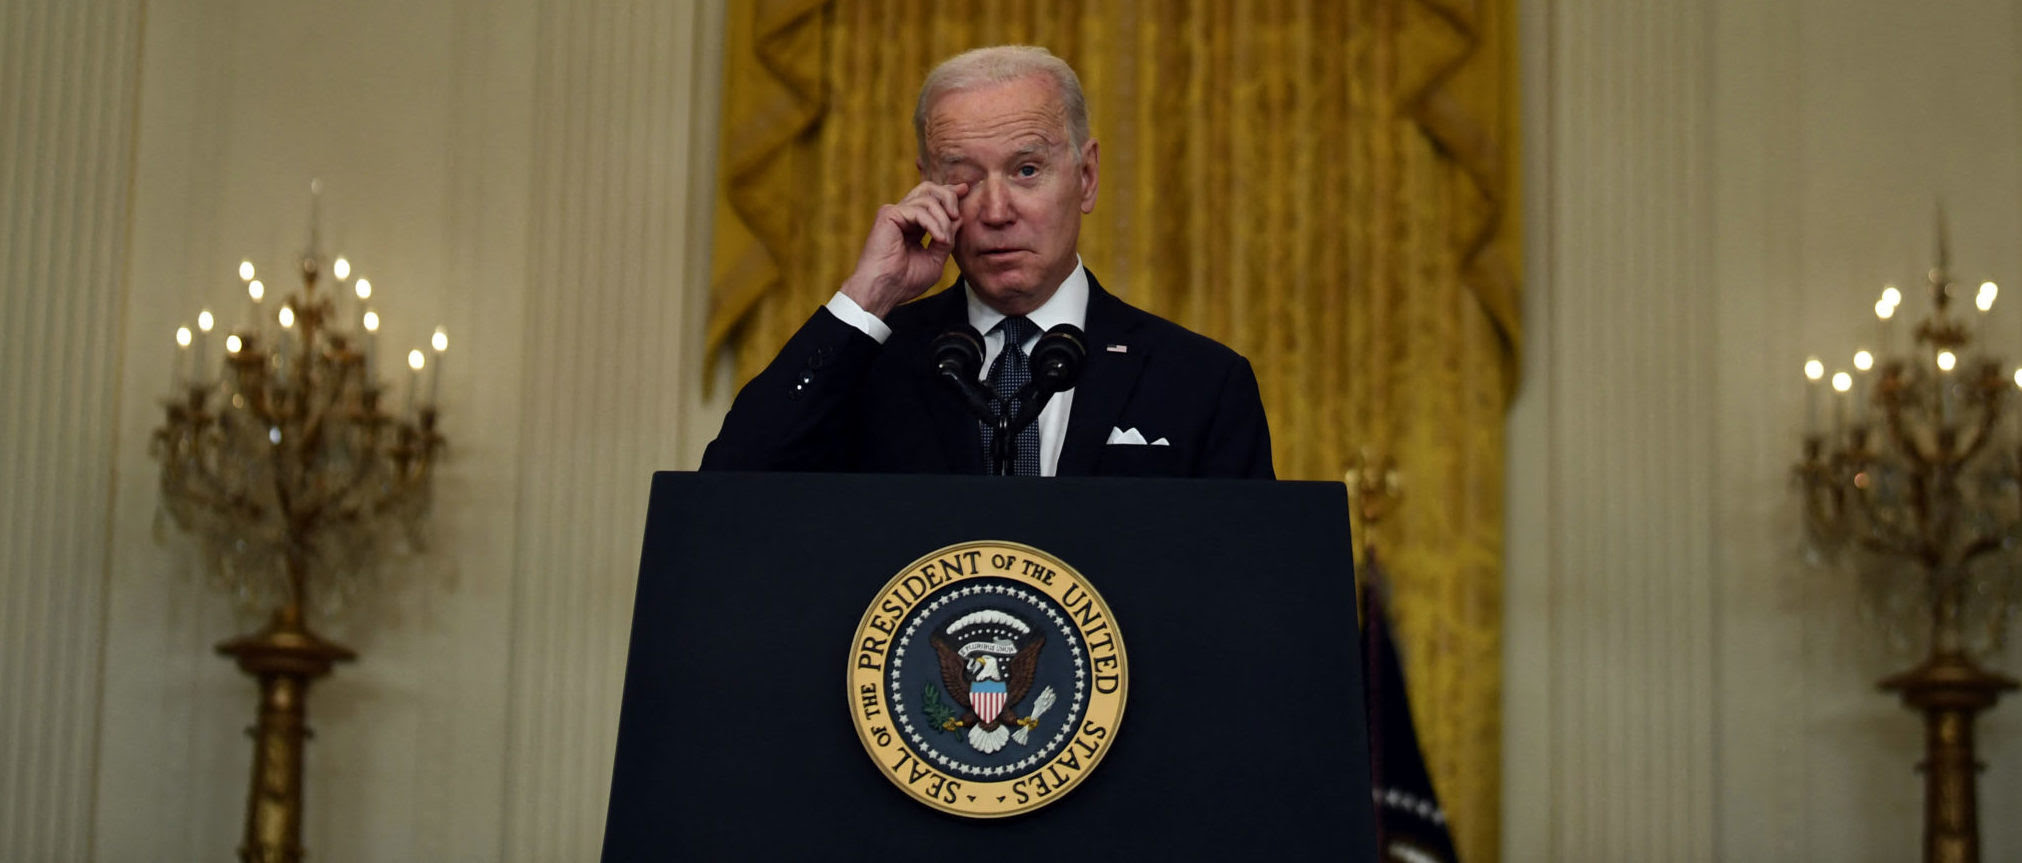 ‘Secure The Border’: Biden Calls For Fixing Immigration System In SOTU Address